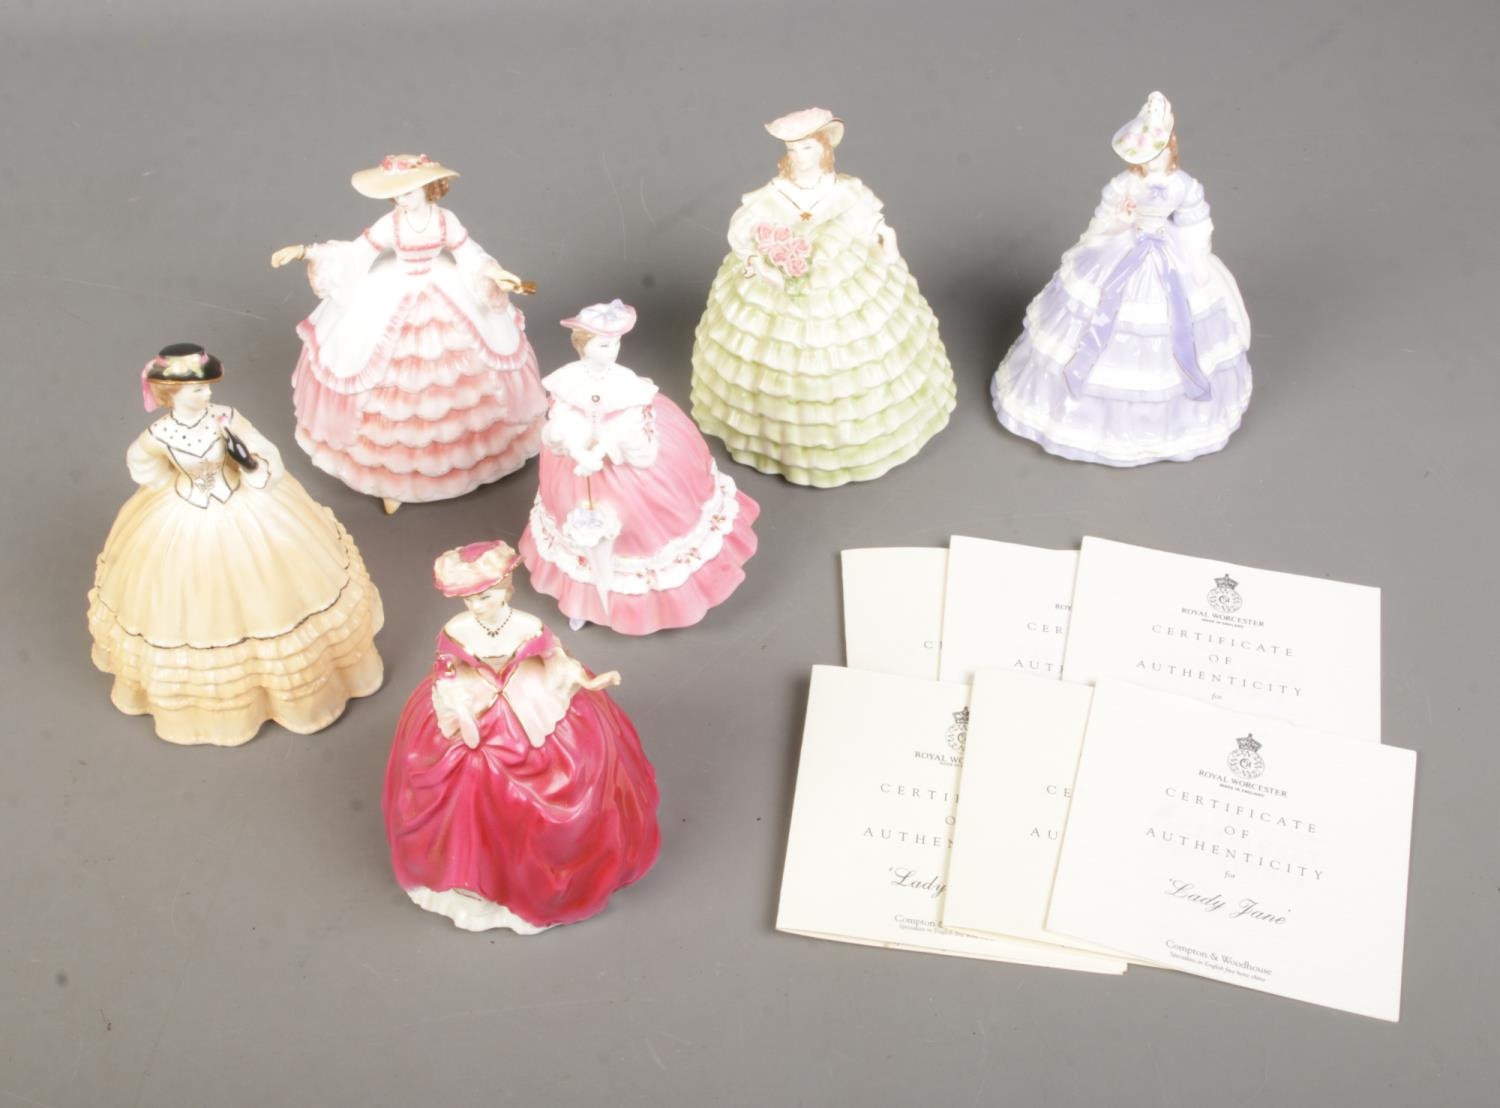 Six limited edition Royal Worcester ceramic figures from 'The Fashionable Victorians' collection.